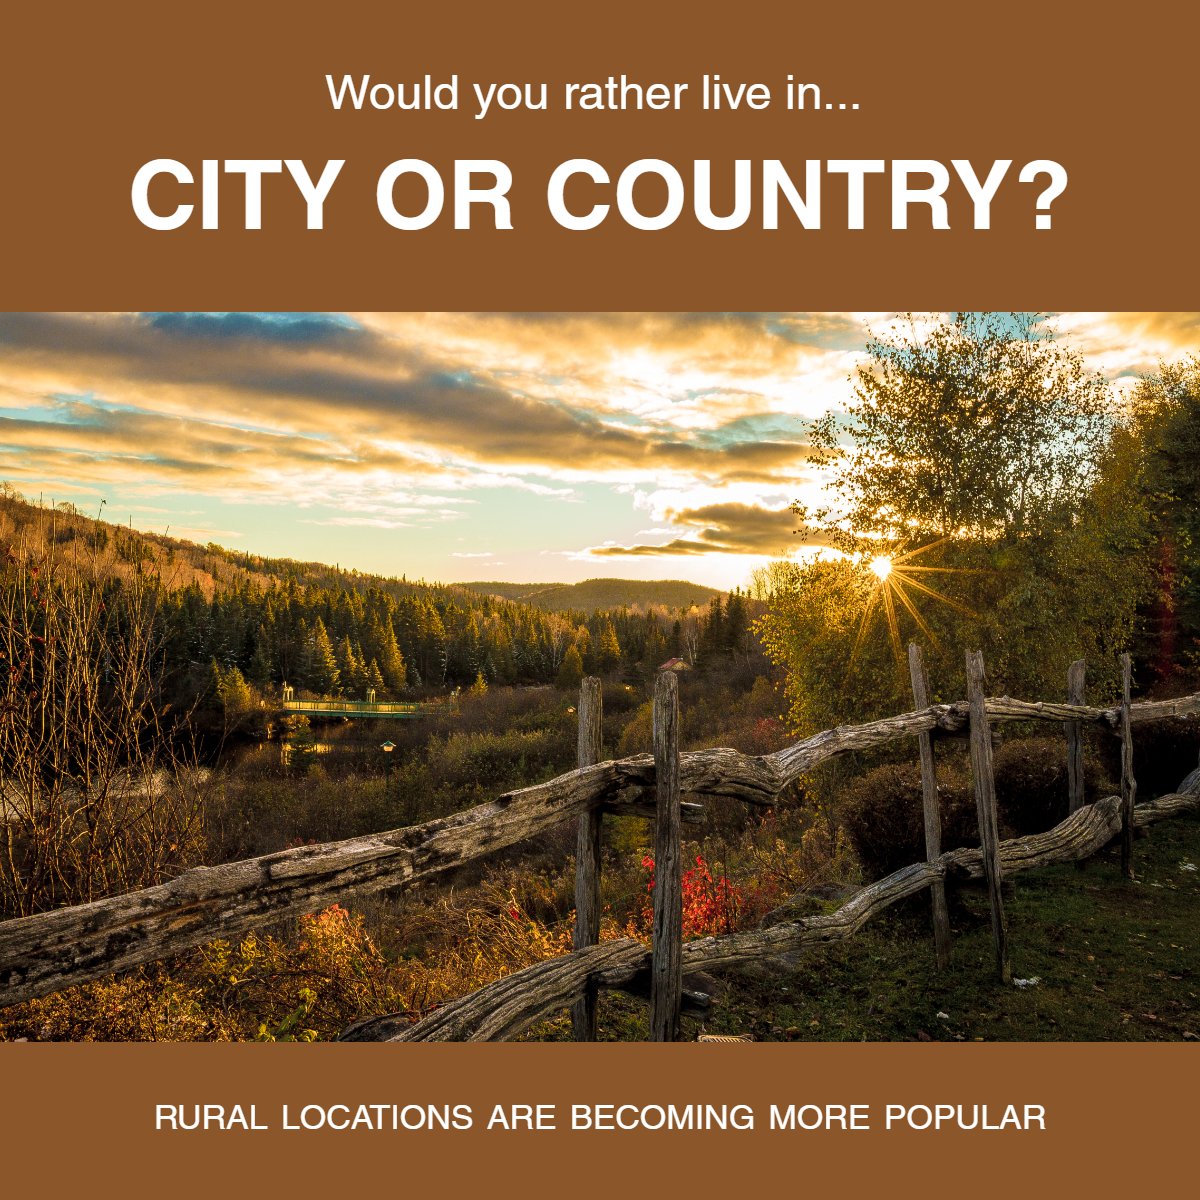 Would you rather live in the city or country 🏙️🌄

#wouldyourather #cityorcountry #awayfromcitylights #citylights #realestatequestion #realestate
#knowthegame #IXLREALESTATE #SouthAlabamaHomeSearch